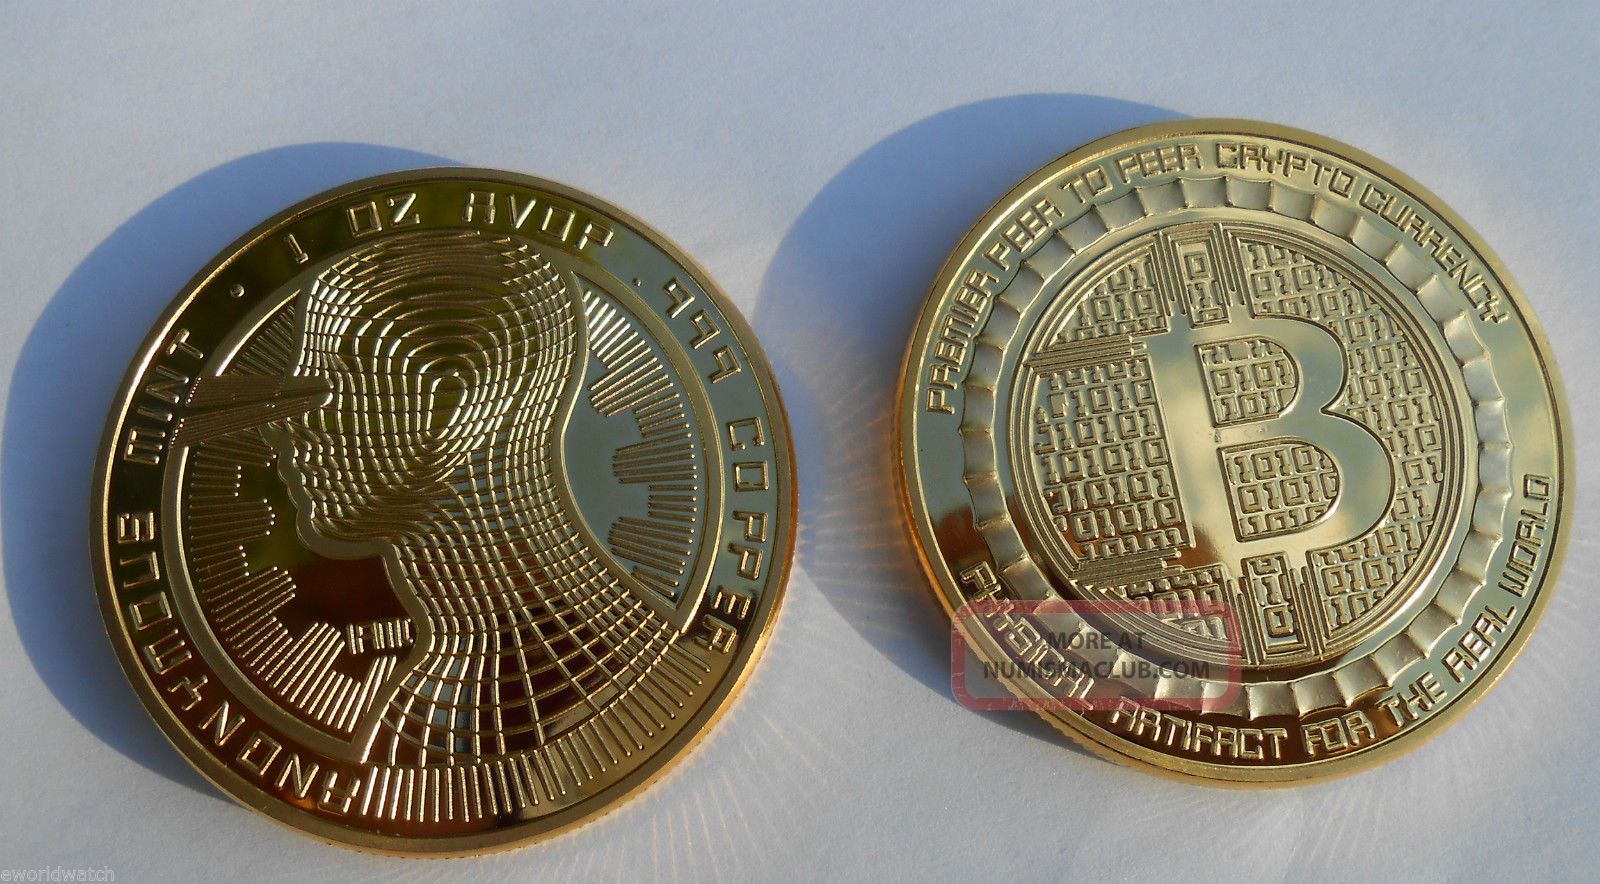 Very Stunning And The Silk Road Btc American Bitcoin Unc (design)